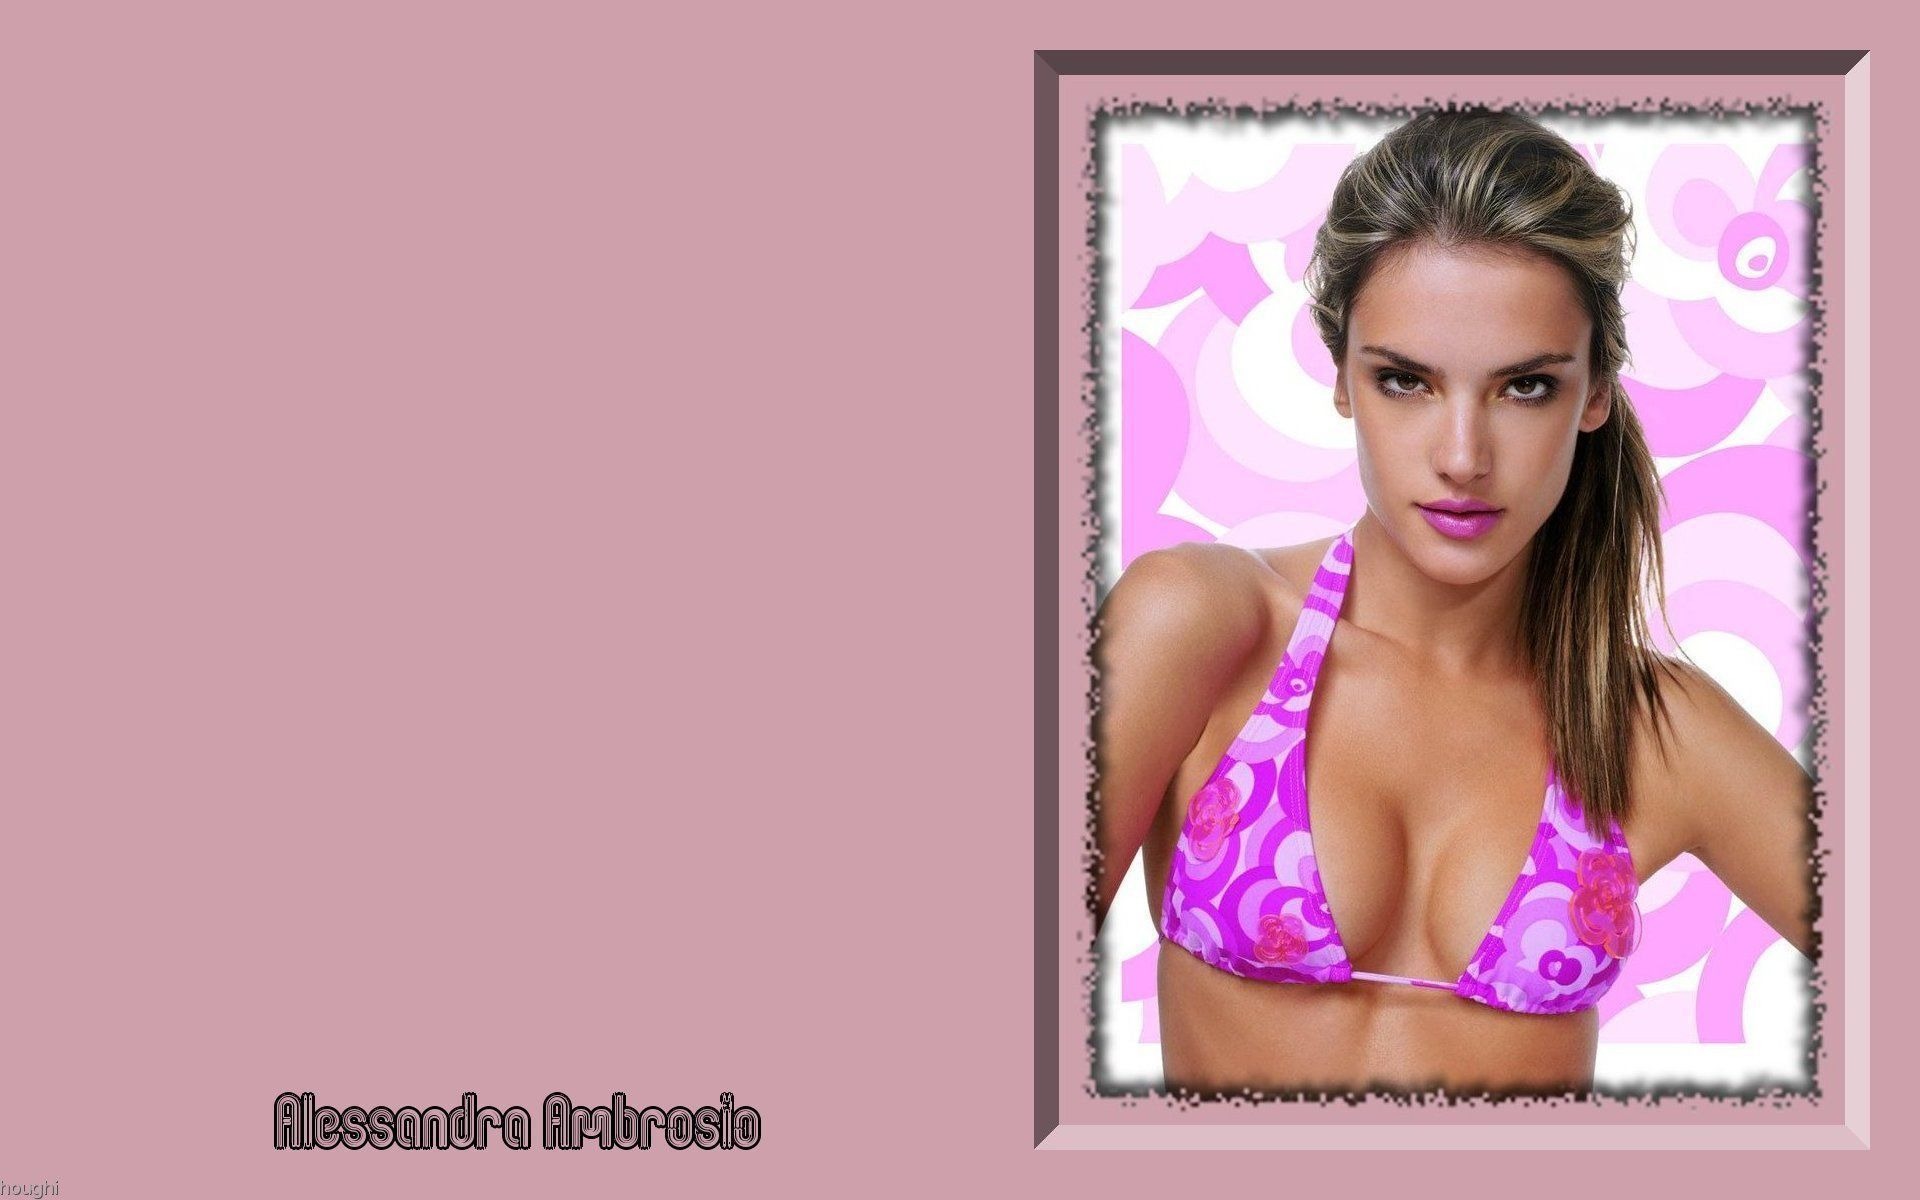 Alessandra Ambrosio #090 - 1920x1200 Wallpapers Pictures Photos Images